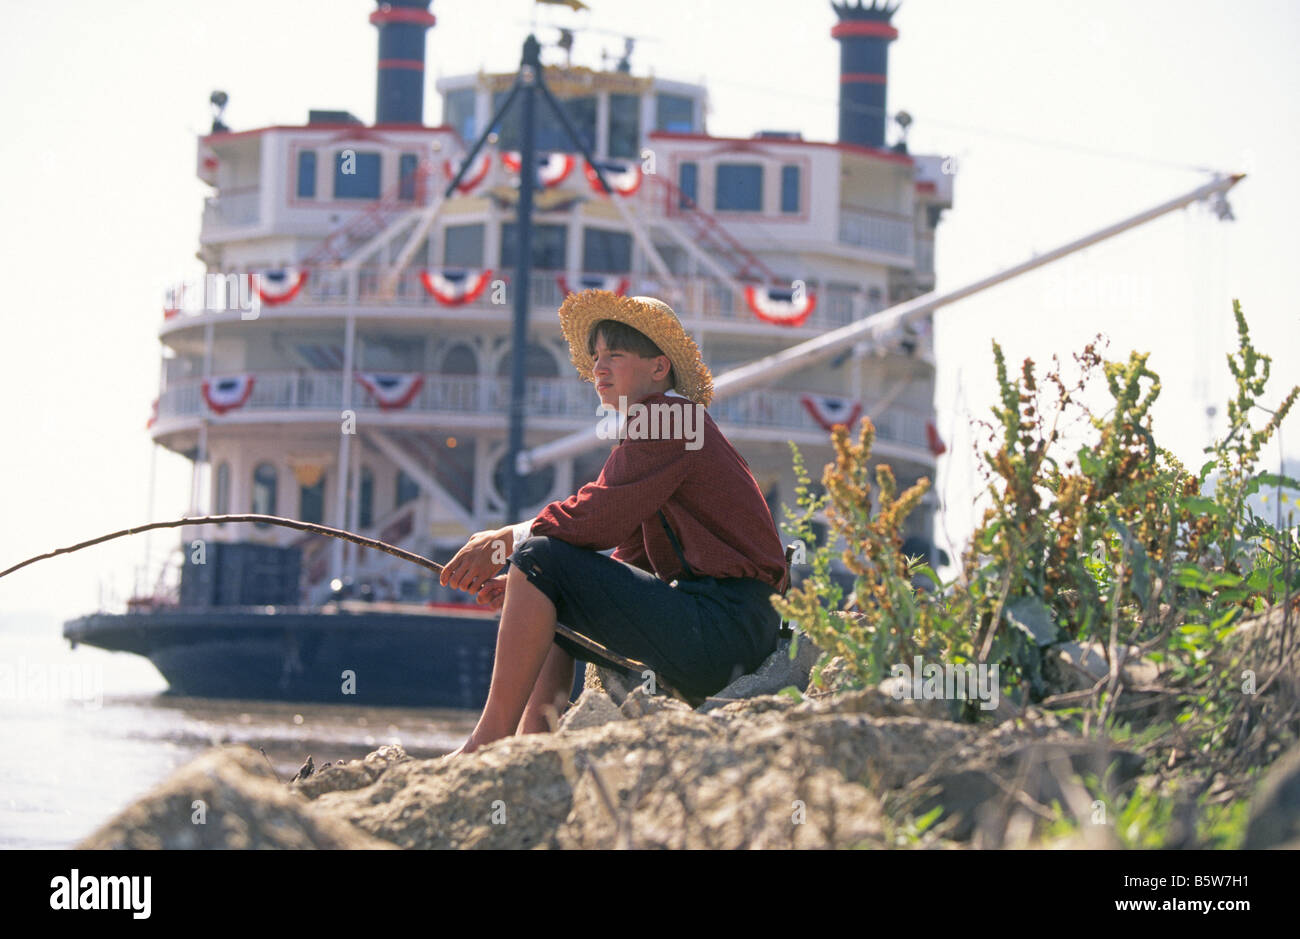 A Huck Finn Huckleberry Finn look alike fishes for catfish on the Mississippi River with the Mississippi Queen steamboat, Hannibal, Missouri. Stock Photo